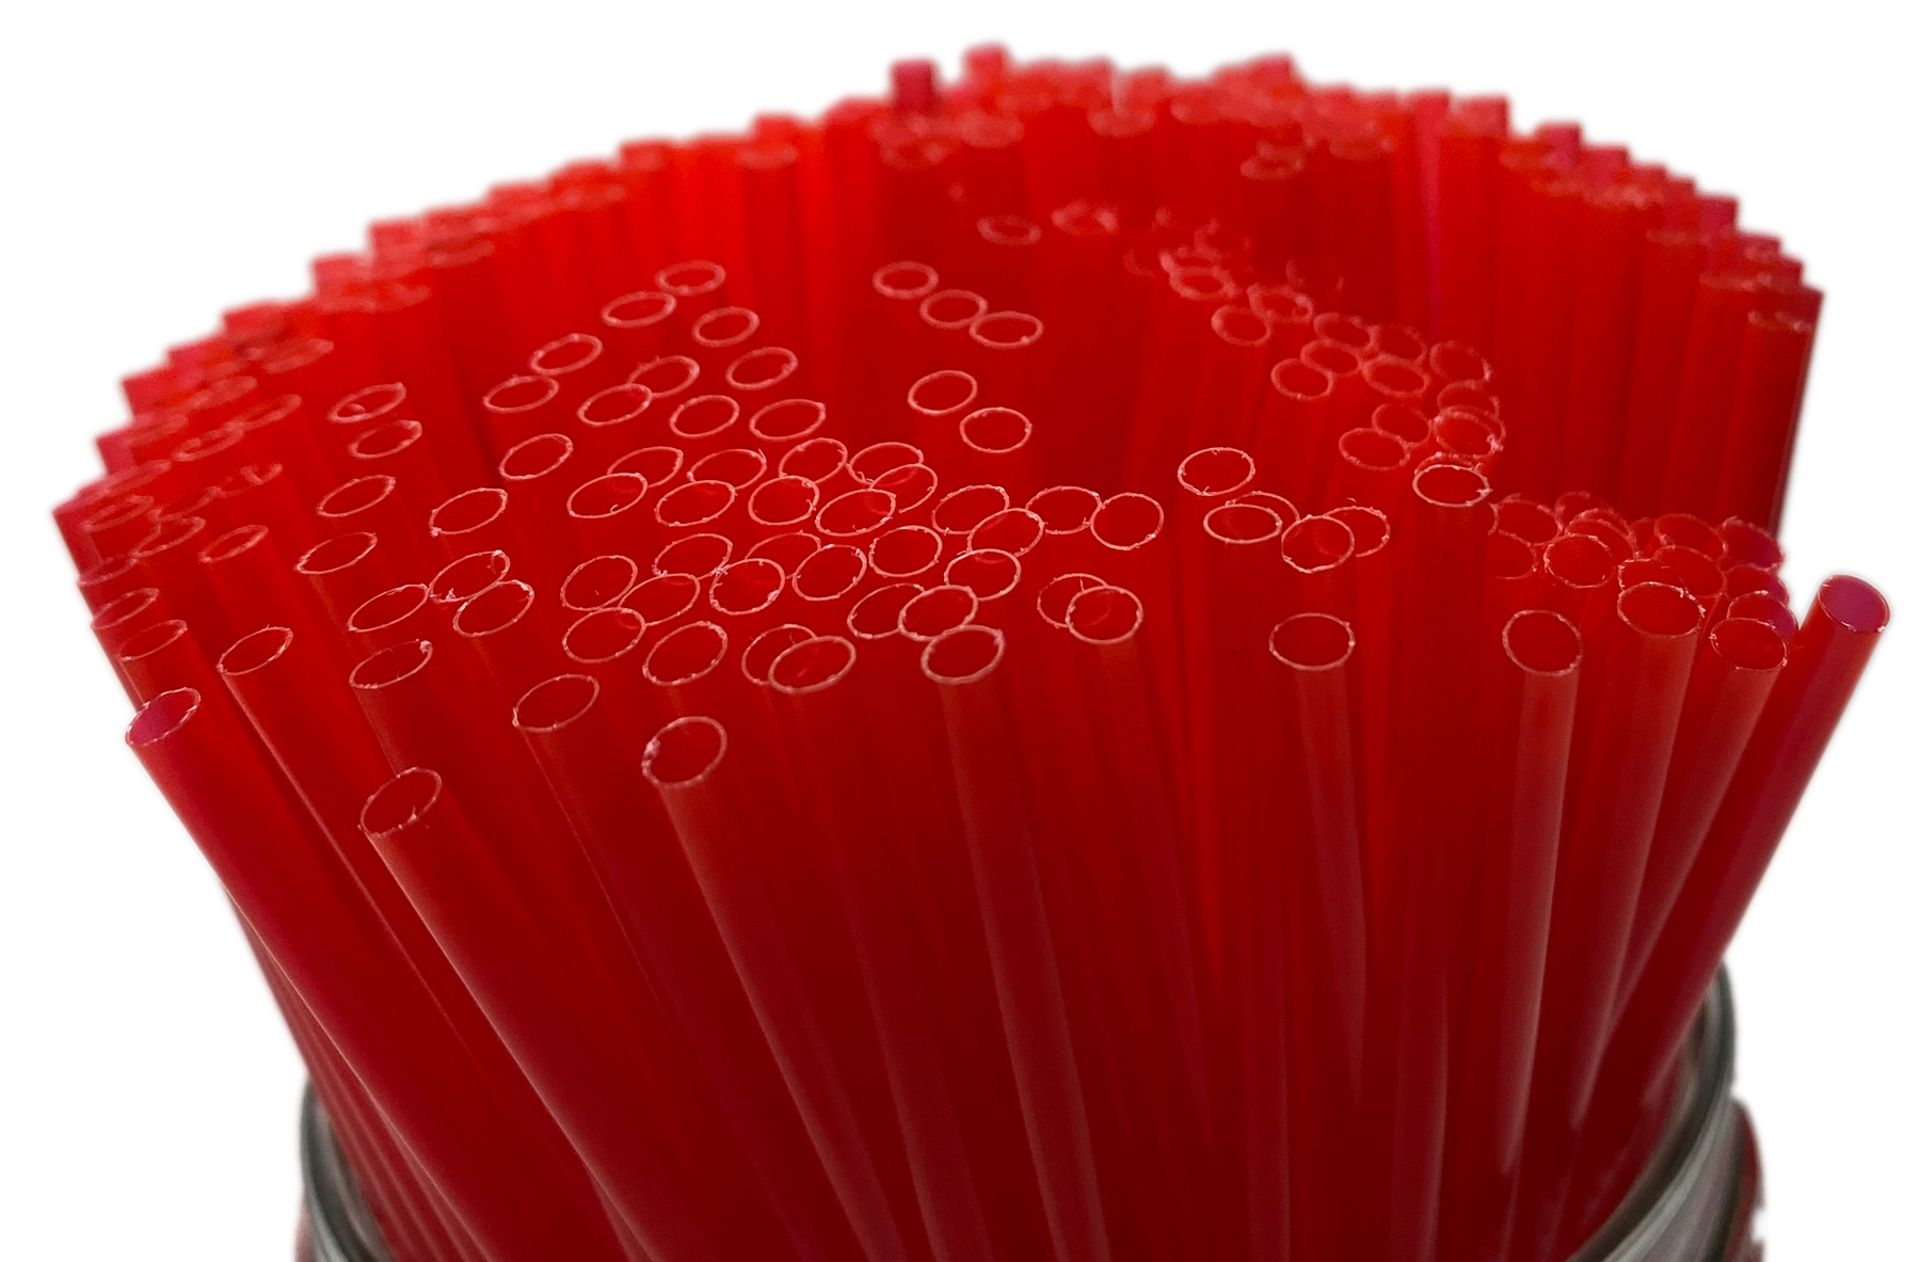 5 x Boxes of Red Sip Straws by 888 Gastro Disposables - Image 3 of 3